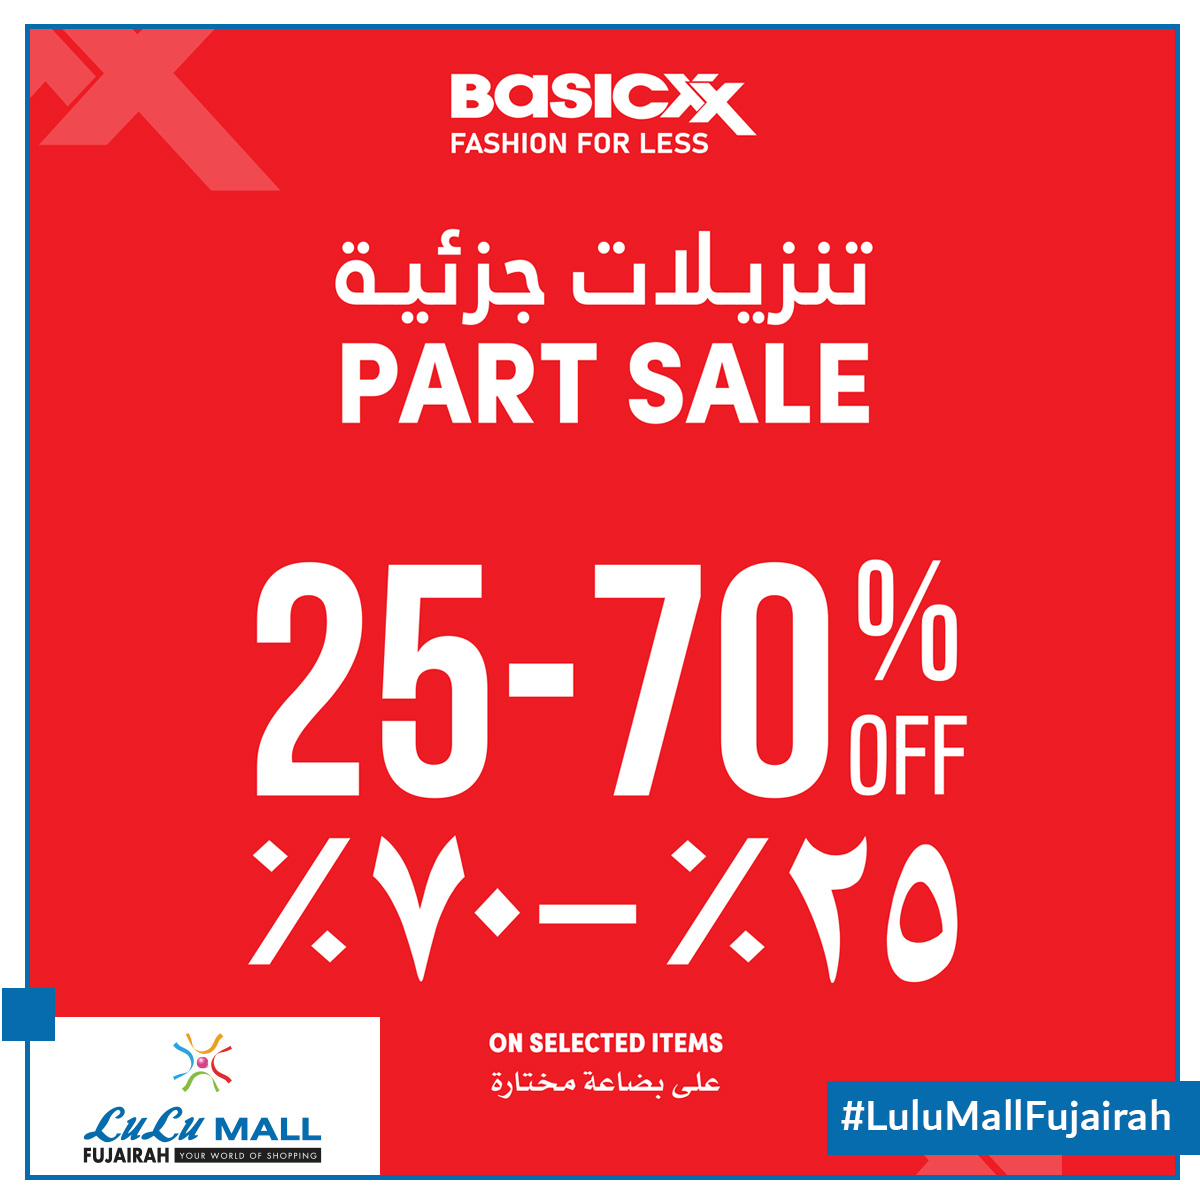 #Basicxx Fashion for Less. Get 25% up to 70% off on selected items. To find out more visit the Basicxx store at Lulu Mall Fujairah.
Hurry … offer valid from 27 may to 21 June only… 🛍🛍🛍

#LuLuMallFujairah #MyFujairah  #Basicxx #PartSale #Fashionforless